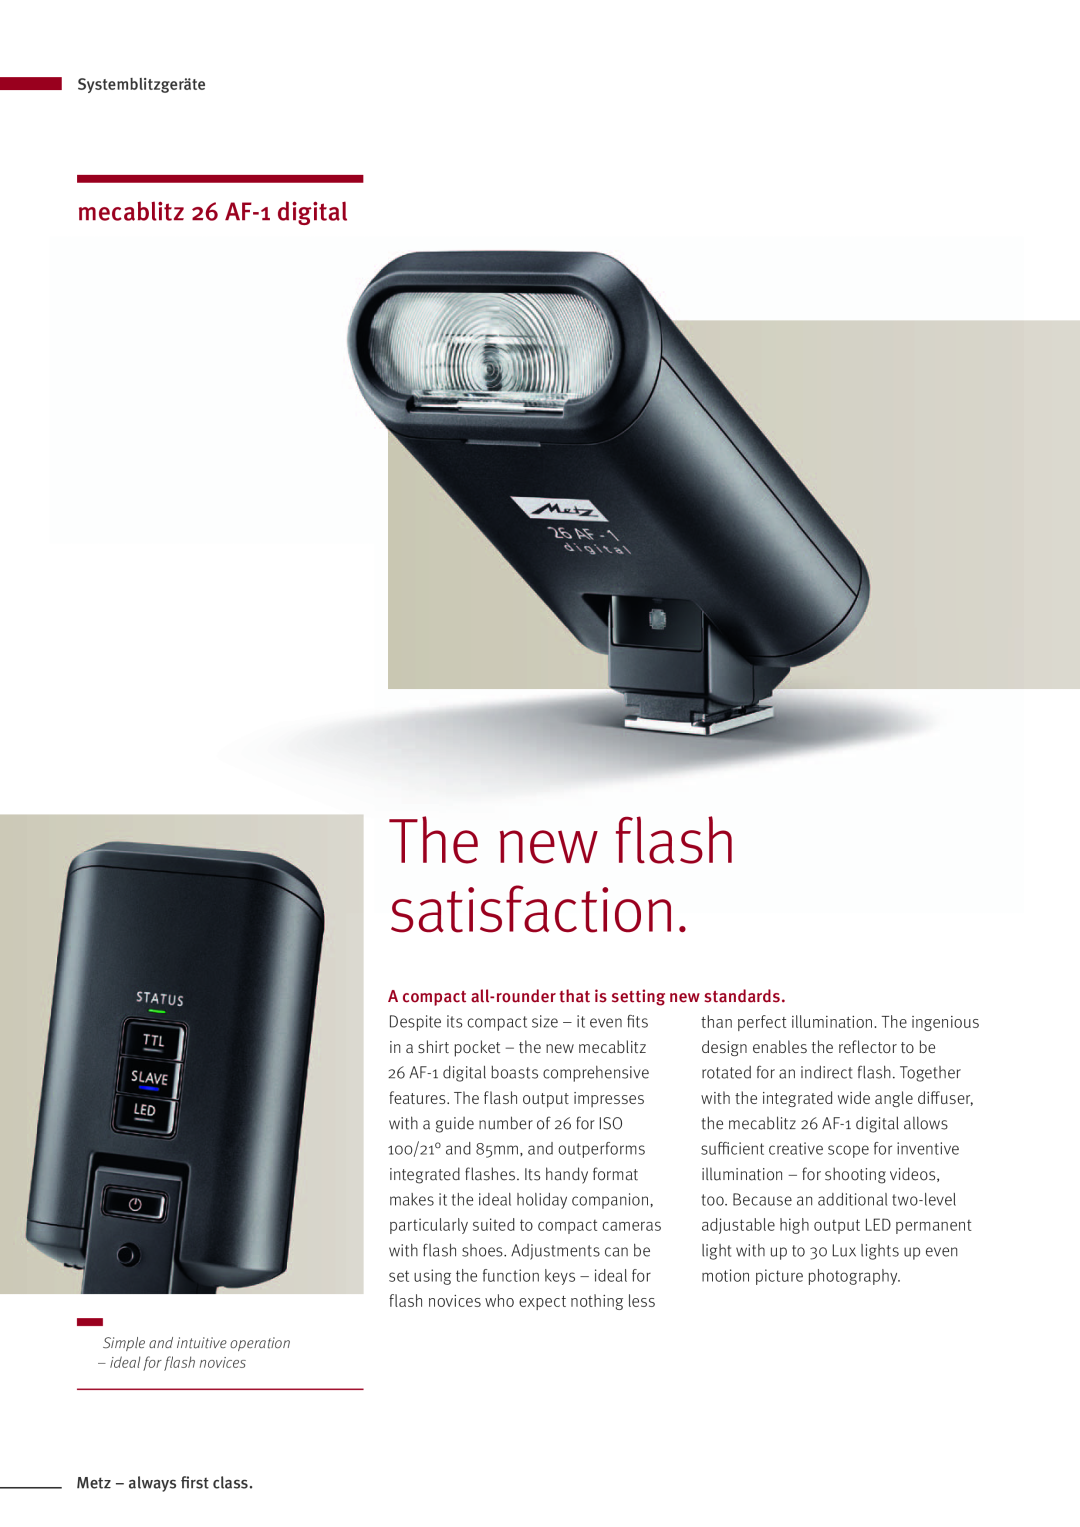 Metz MZ 44314N The new flash satisfaction, mecablitz 26 AF-1 digital, A compact all-rounder that is setting new standards 